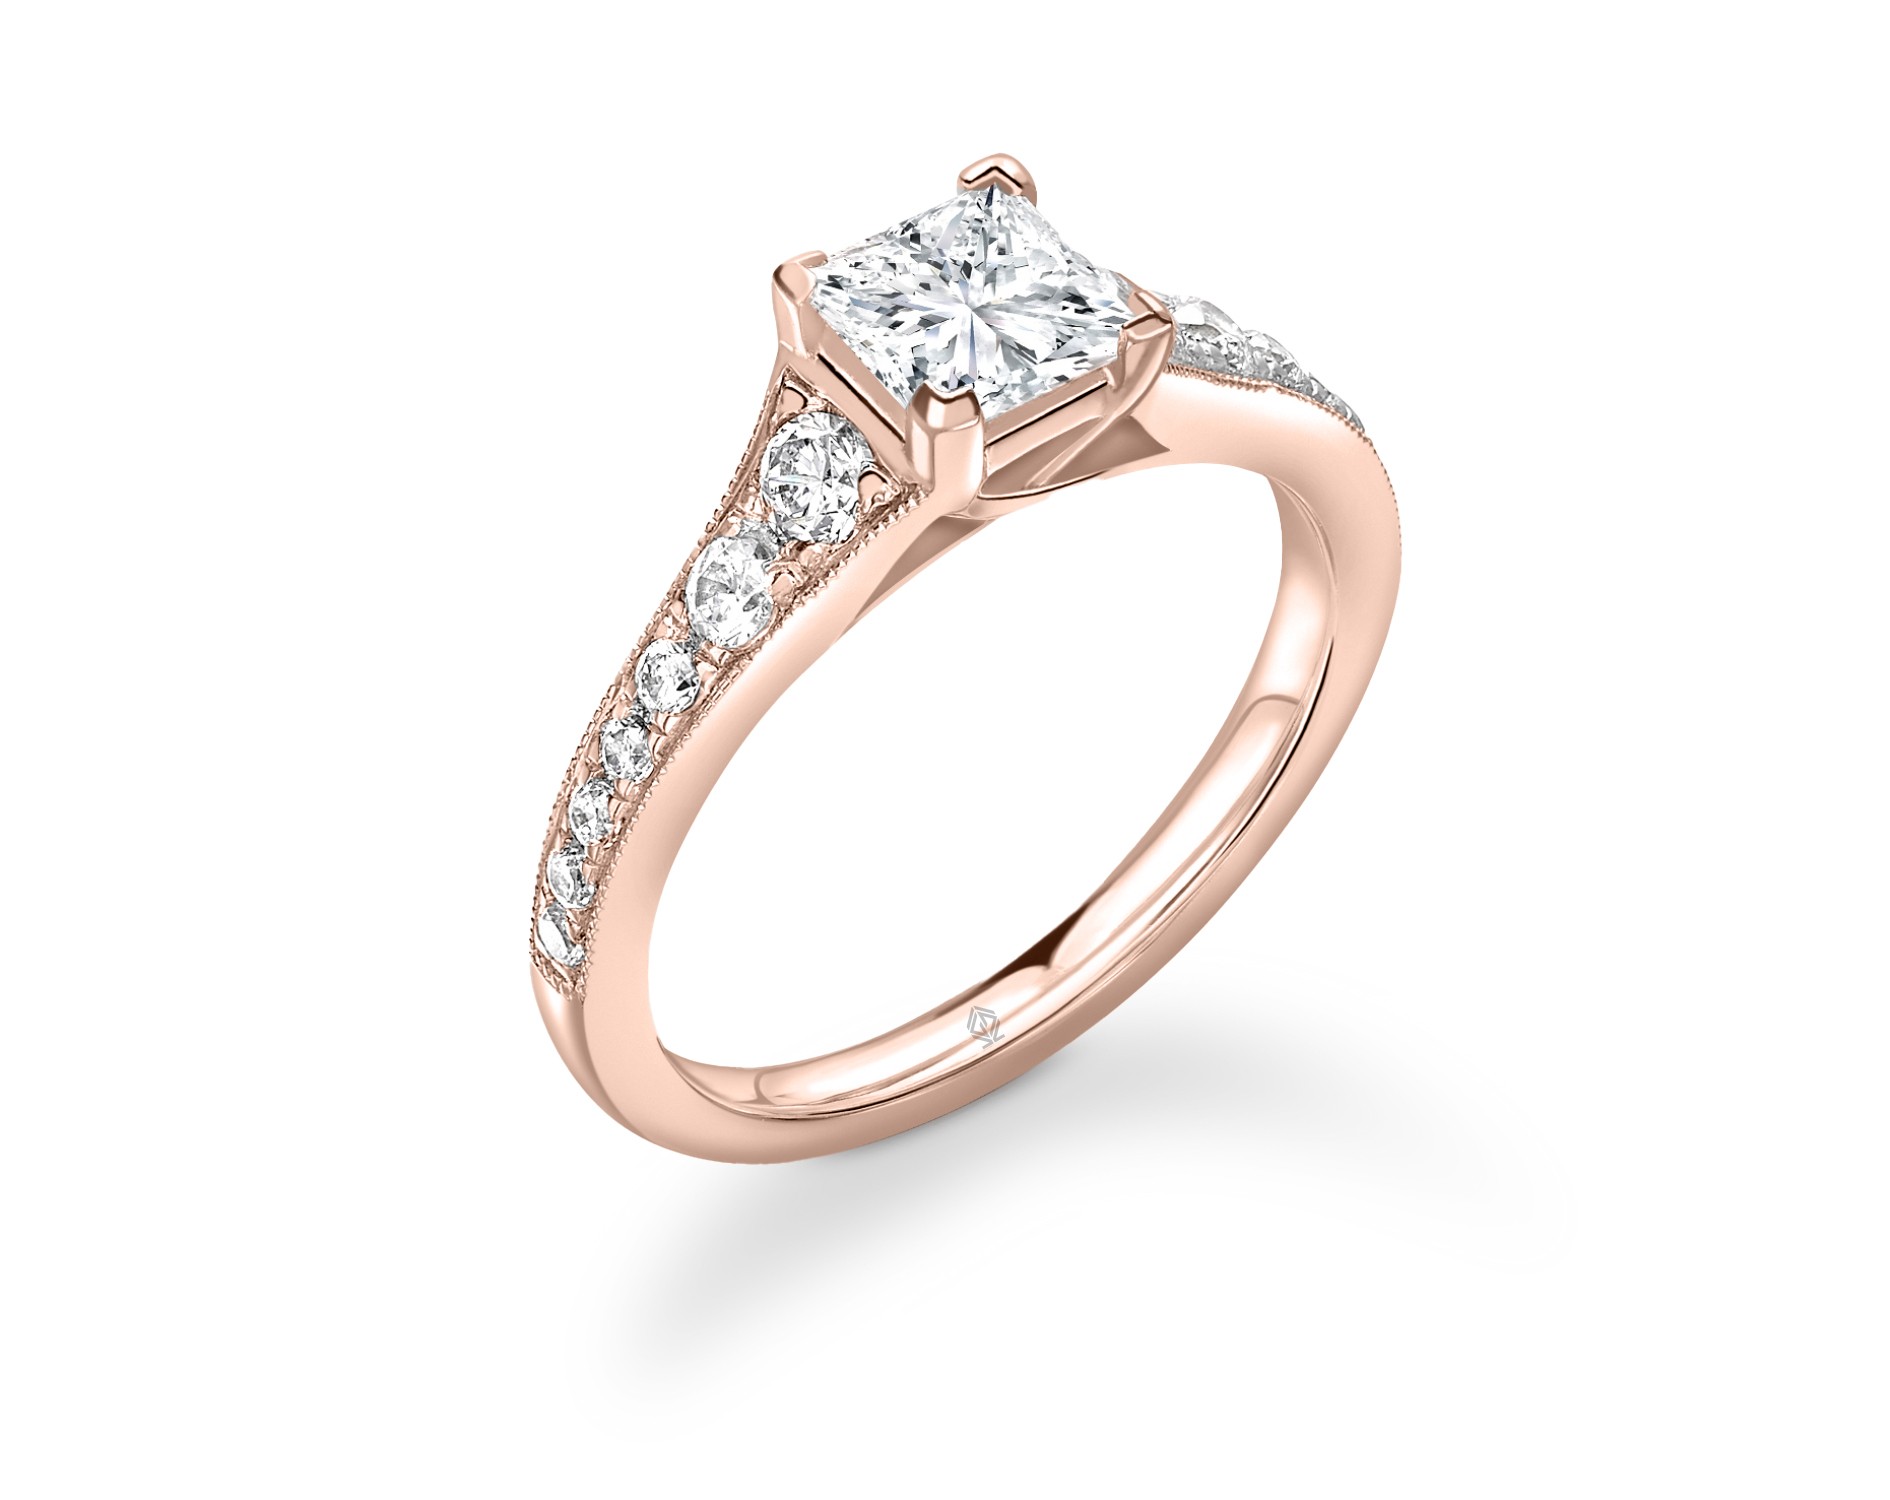 18K ROSE GOLD PRINCESS CUT 4 PRONGS DIAMOND ENGAGEMENT RING WITH SIDE STONES CHANNEL SET